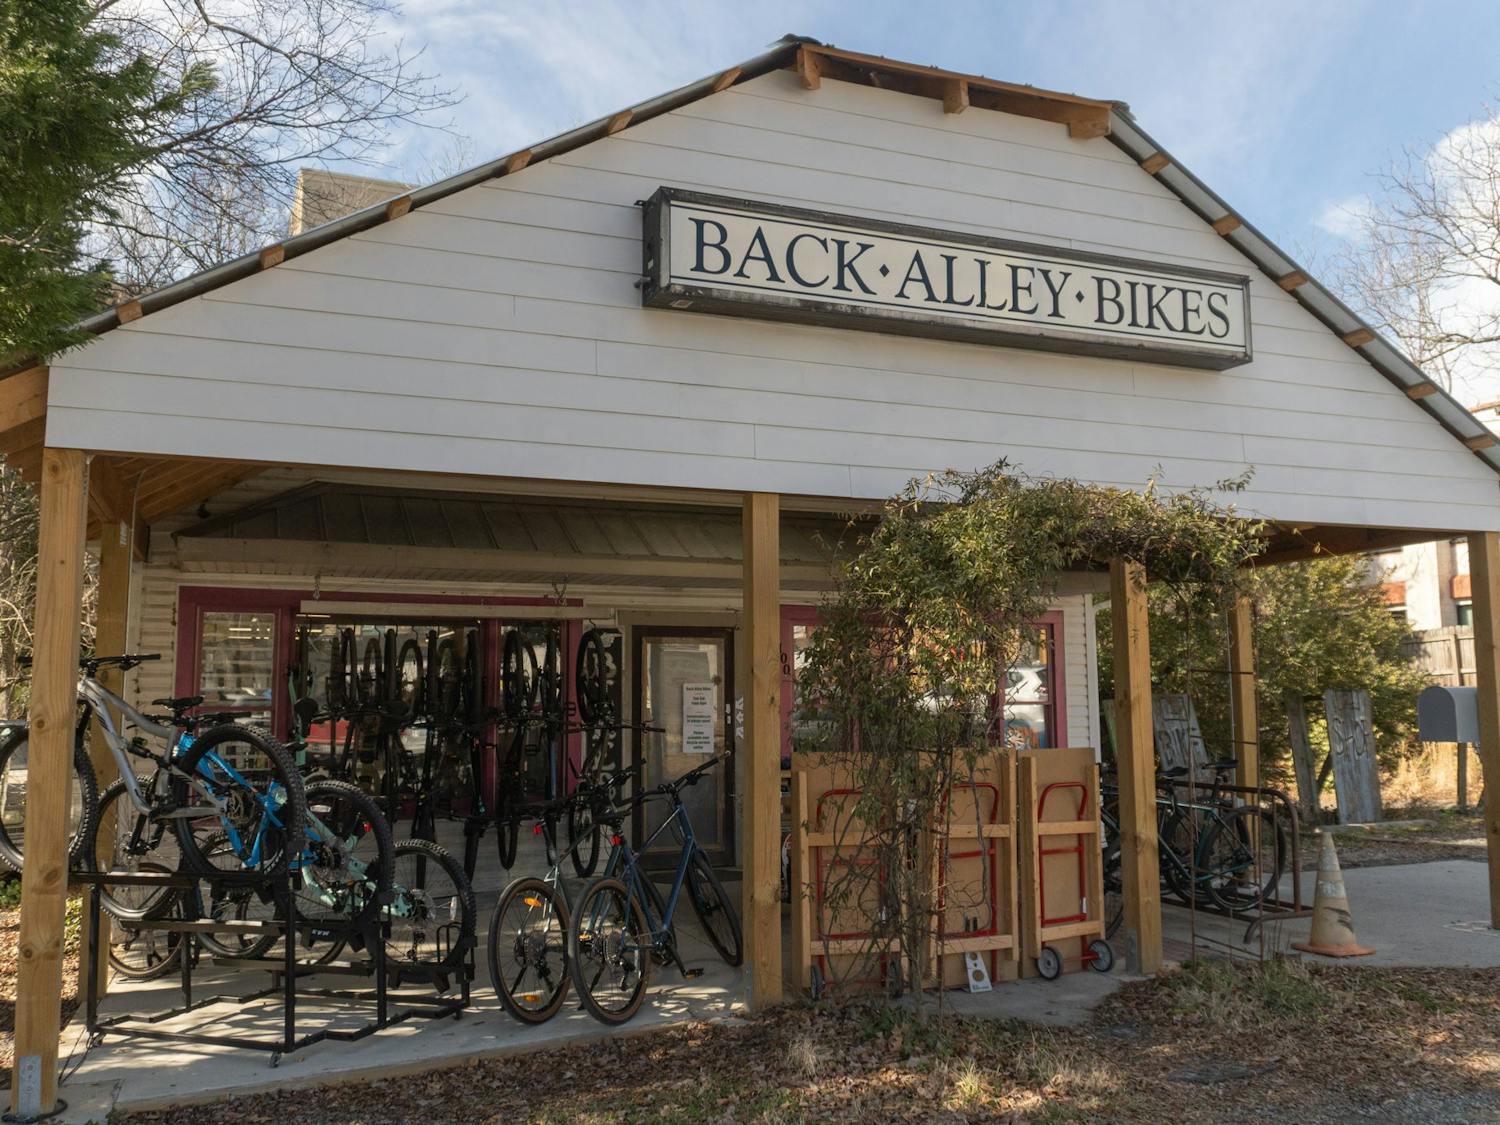 Back Alley Bikes, photographed on Feb. 2, is located in Carborro. Back Alley Bikes is an Orange County living wage certified business.